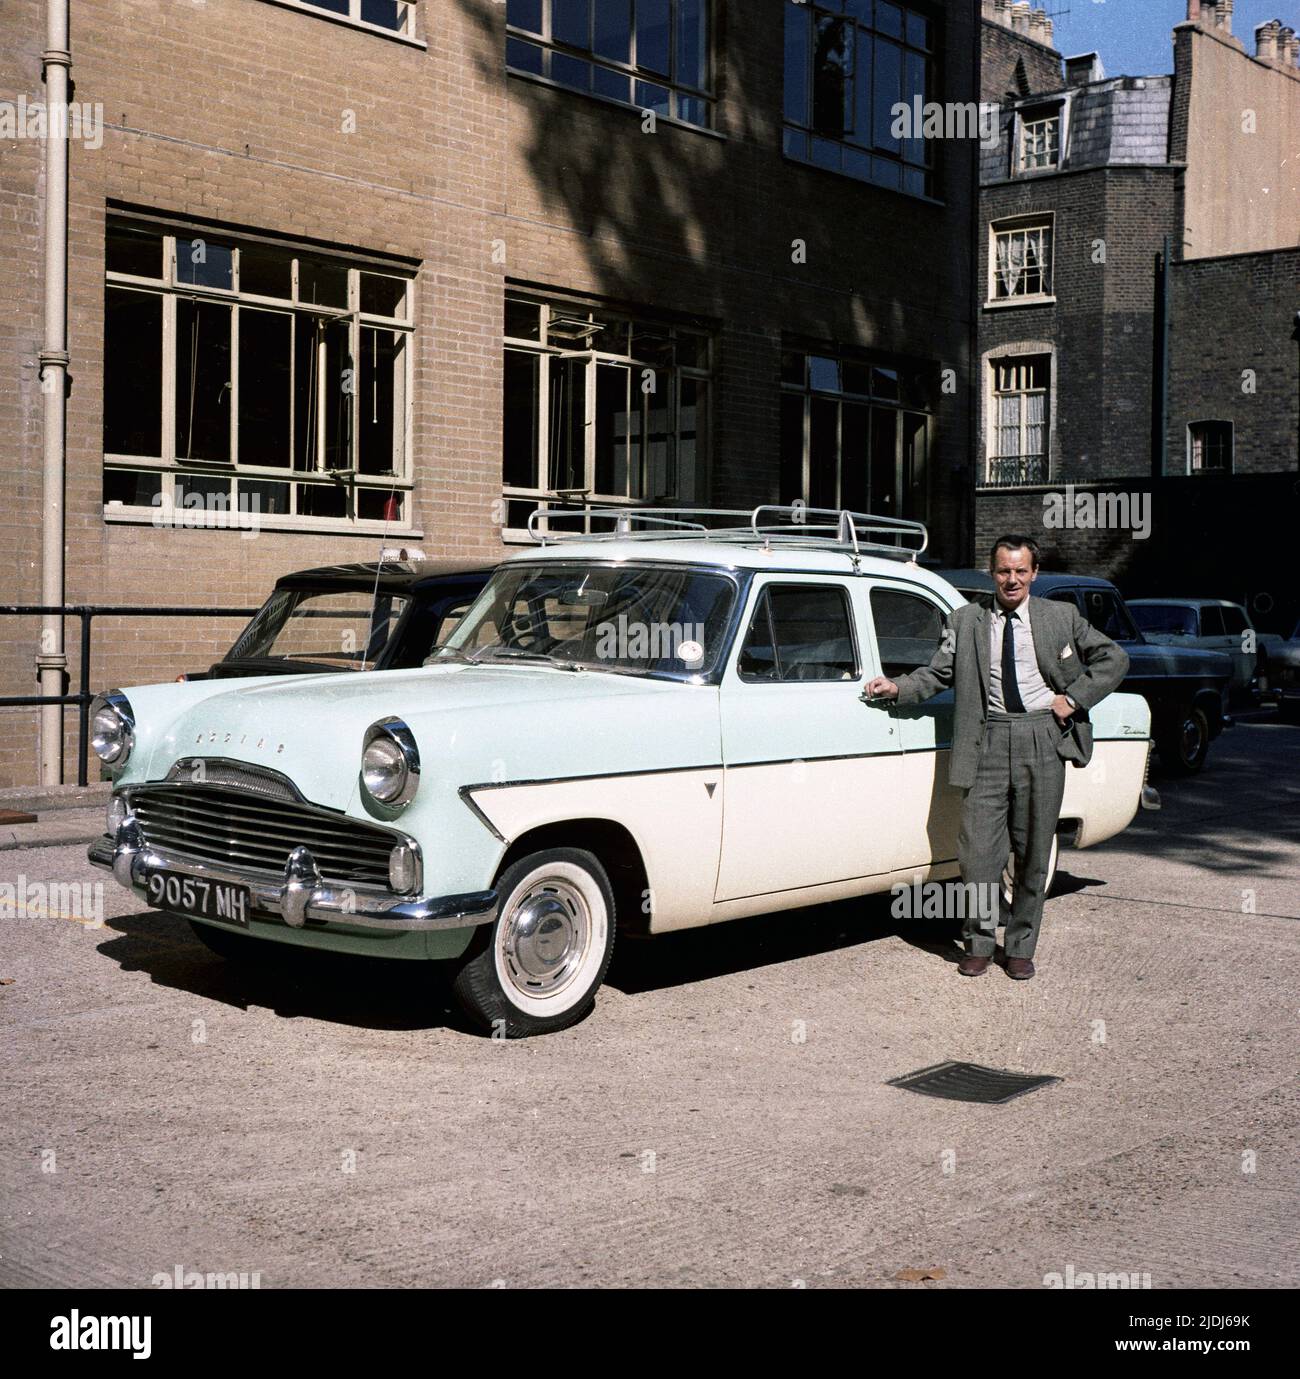 1964, historical, a gentleman in a suit & tie, proudly standing by his car of the era, a tone-tone, British Ford Zodiac, outside offices of Babcock & Wilcock Ltd, England, UK. Stock Photo